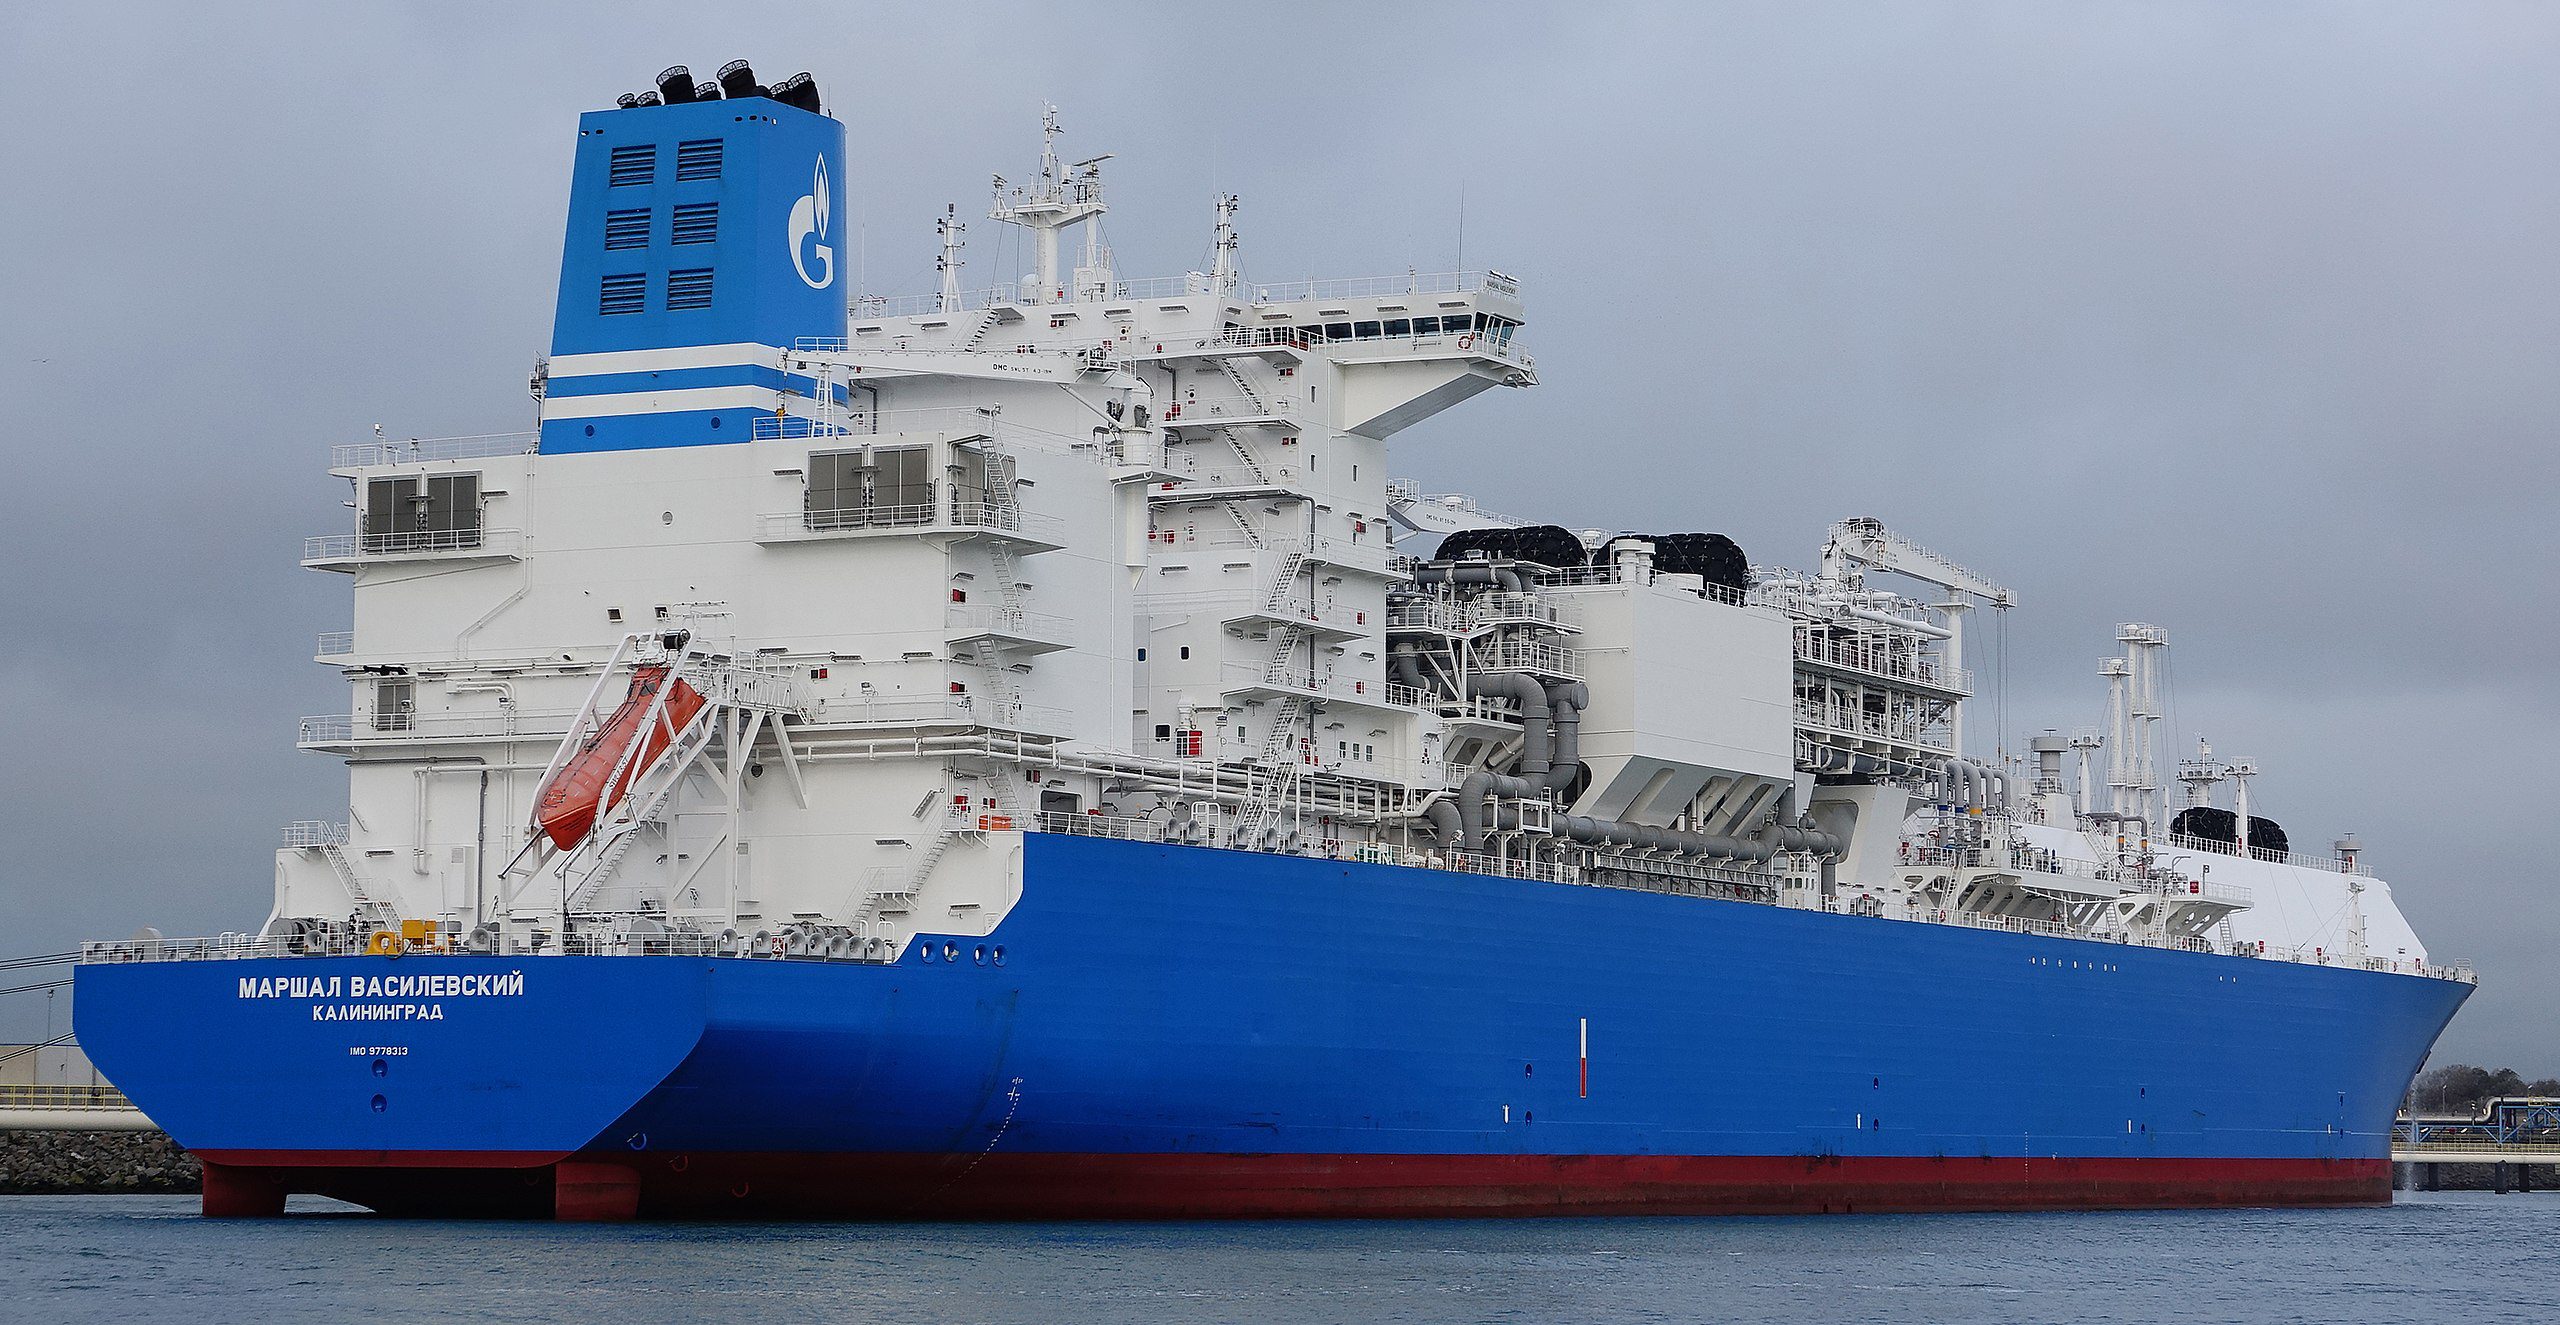 Russian LNG Vessel Back in Baltic Amid Tensions Over Ukraine, Gas Supplies